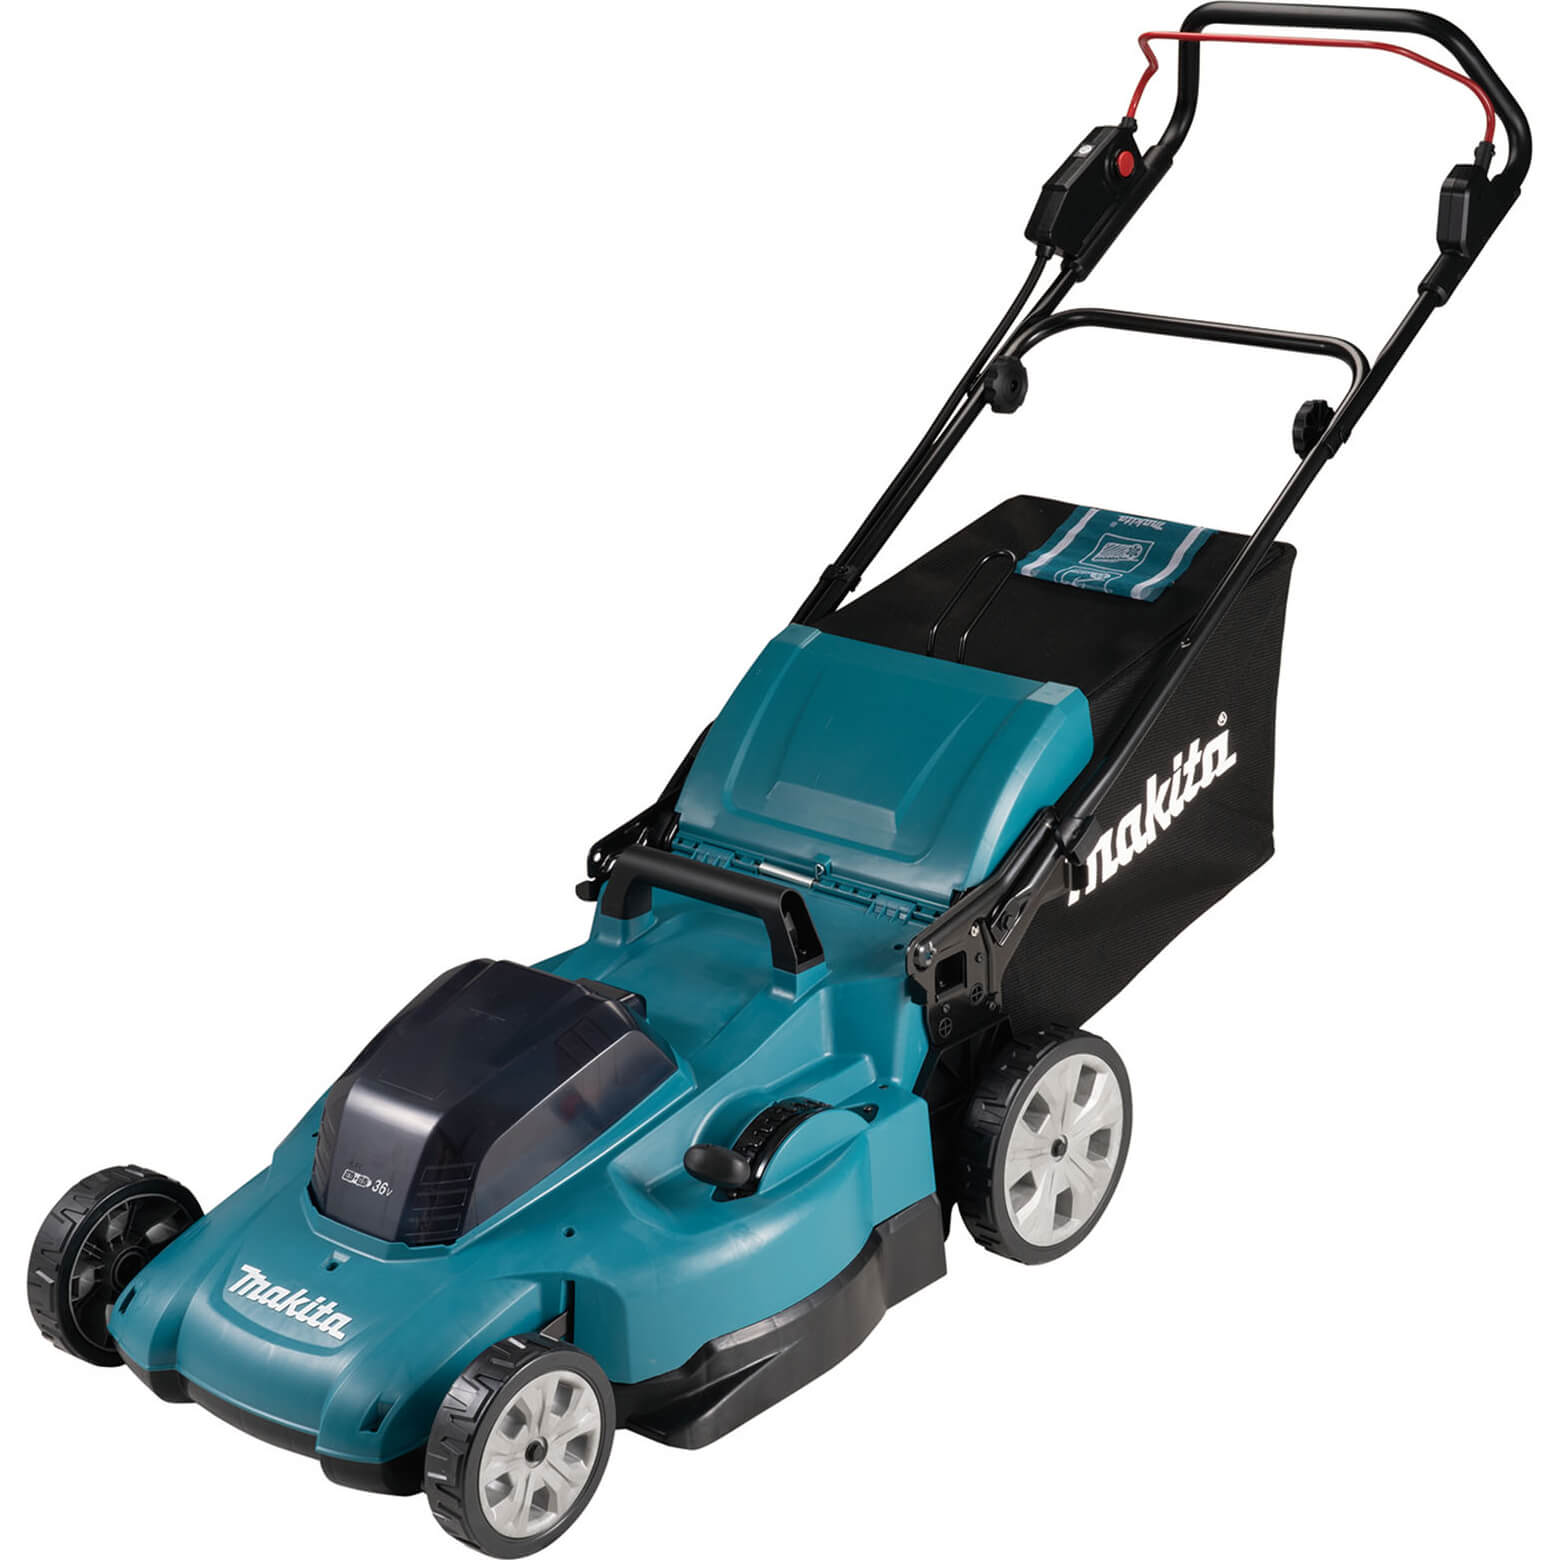 Makita DLM538 Twin 18v LXT Cordless Lawnmower 530mm No Batteries No Charger